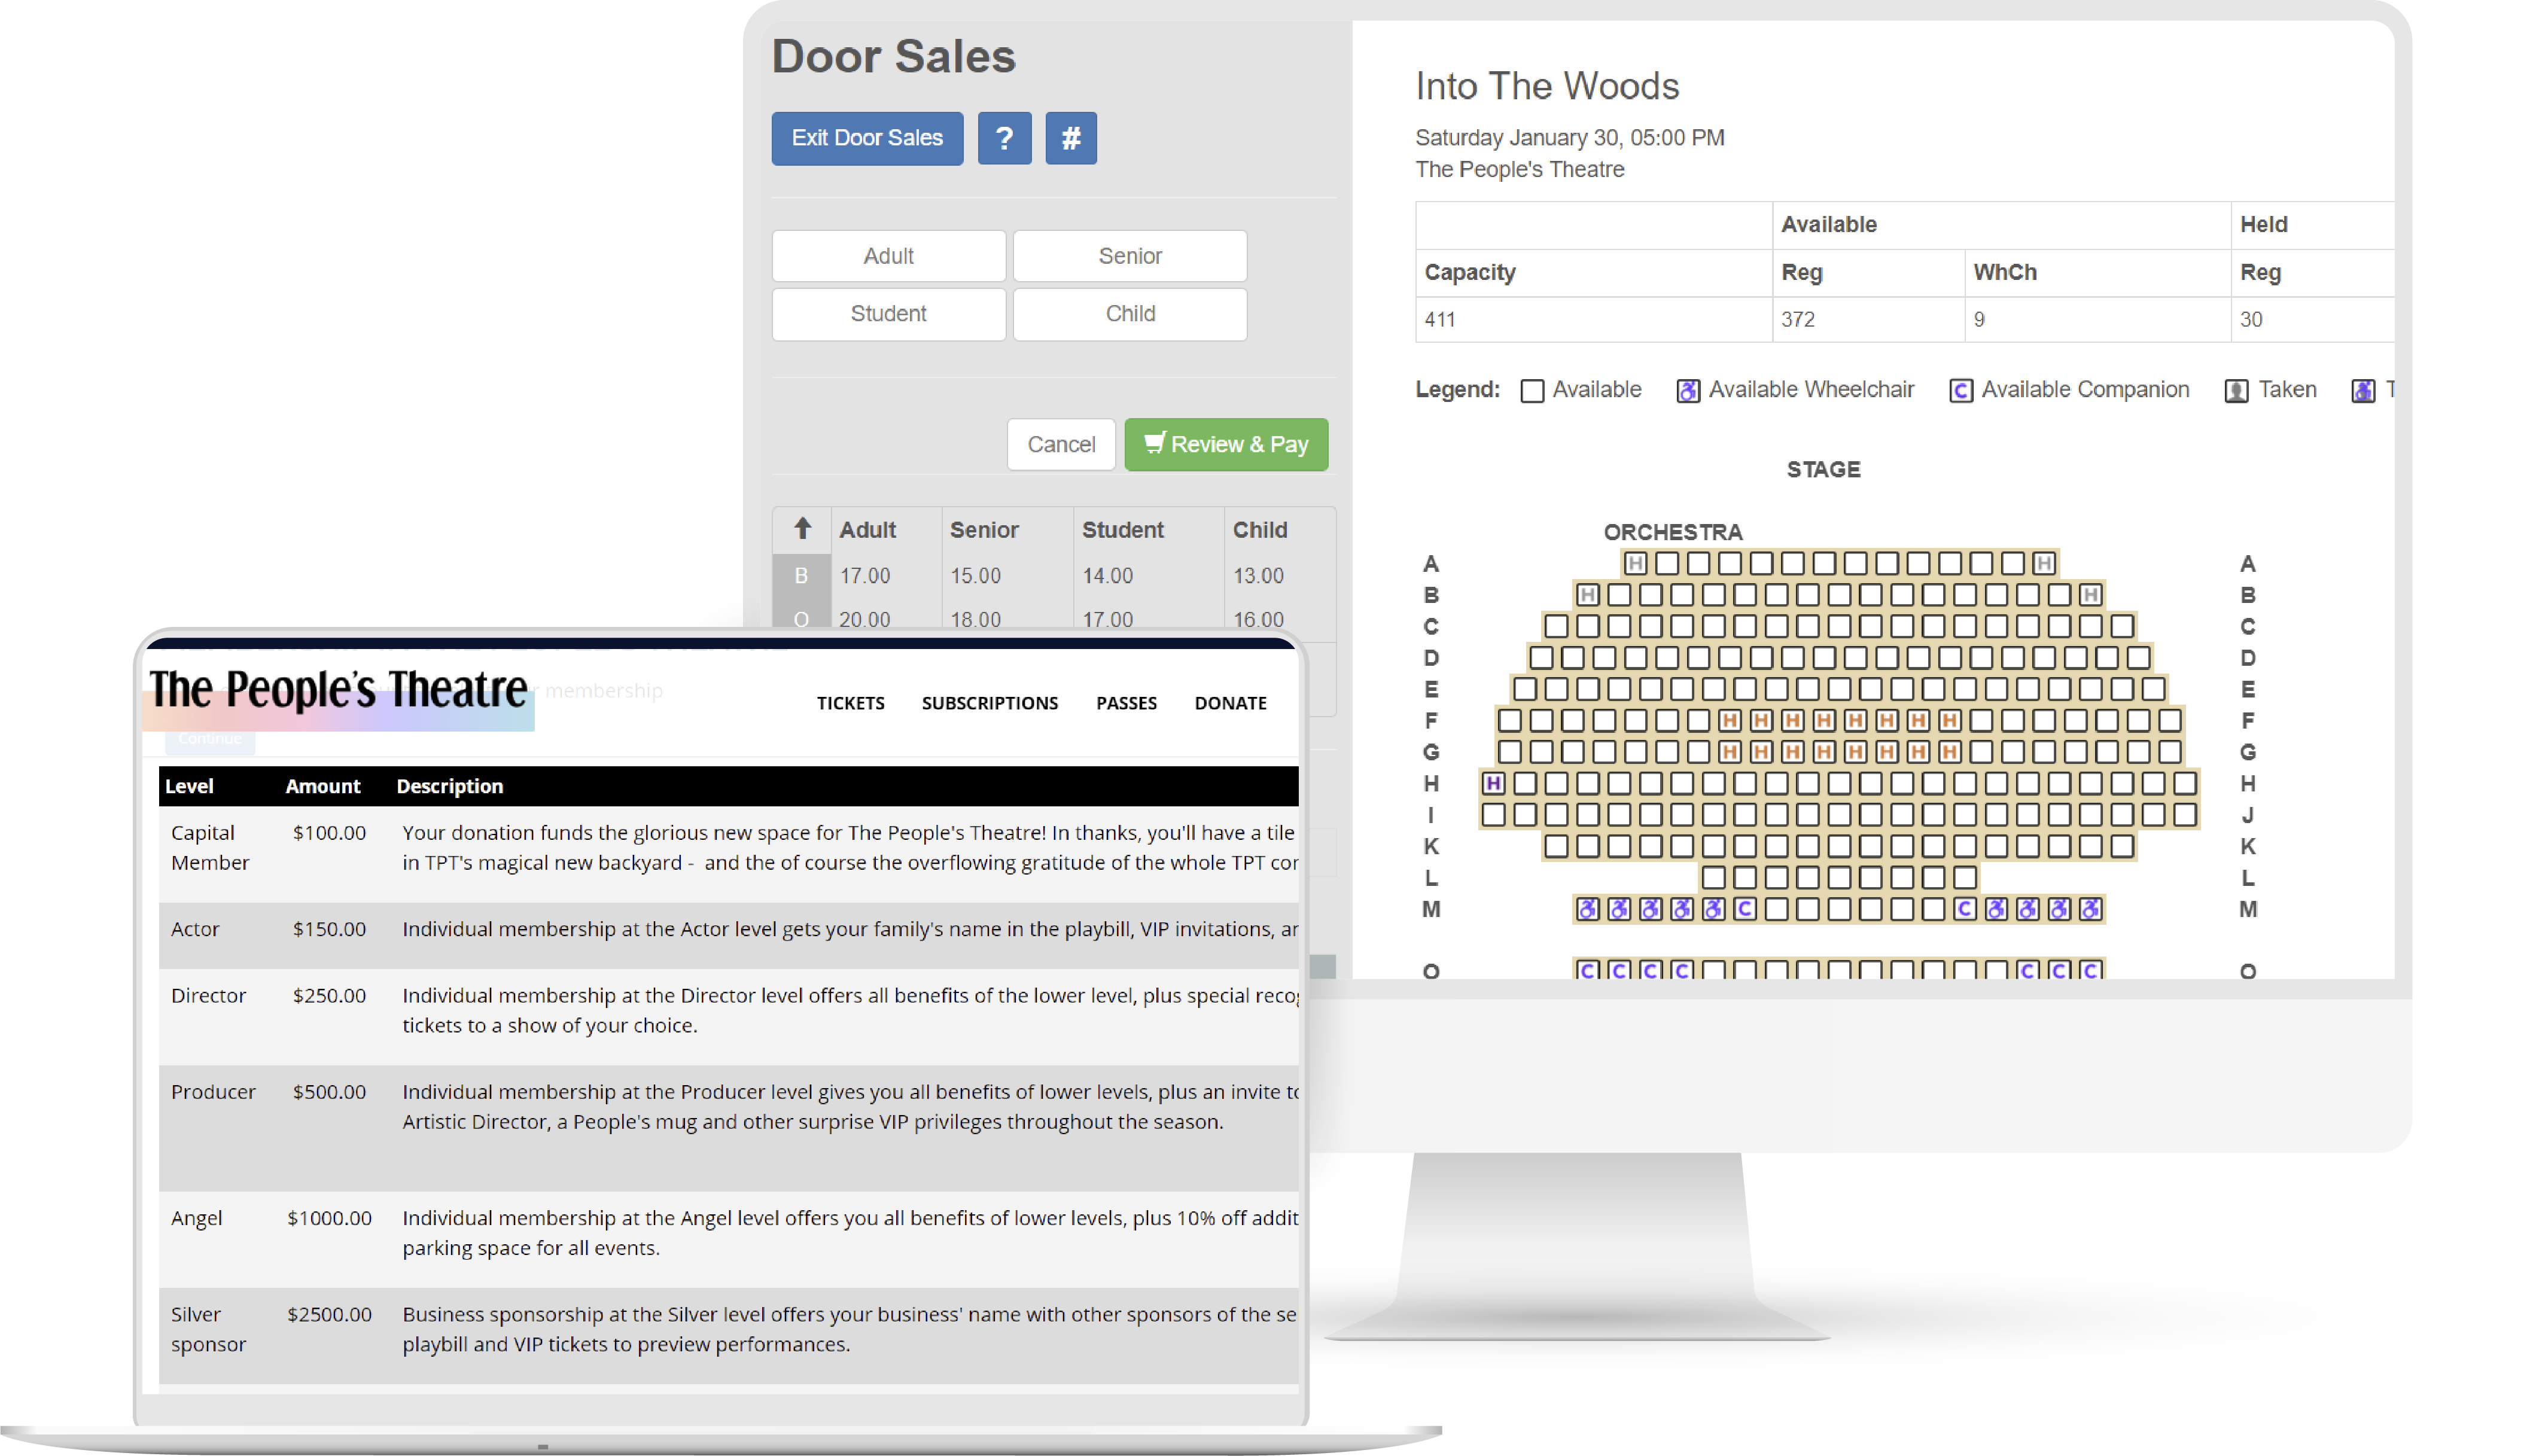 Screenshot of the Arts People software in action, including various ticket levels and venue mapping.